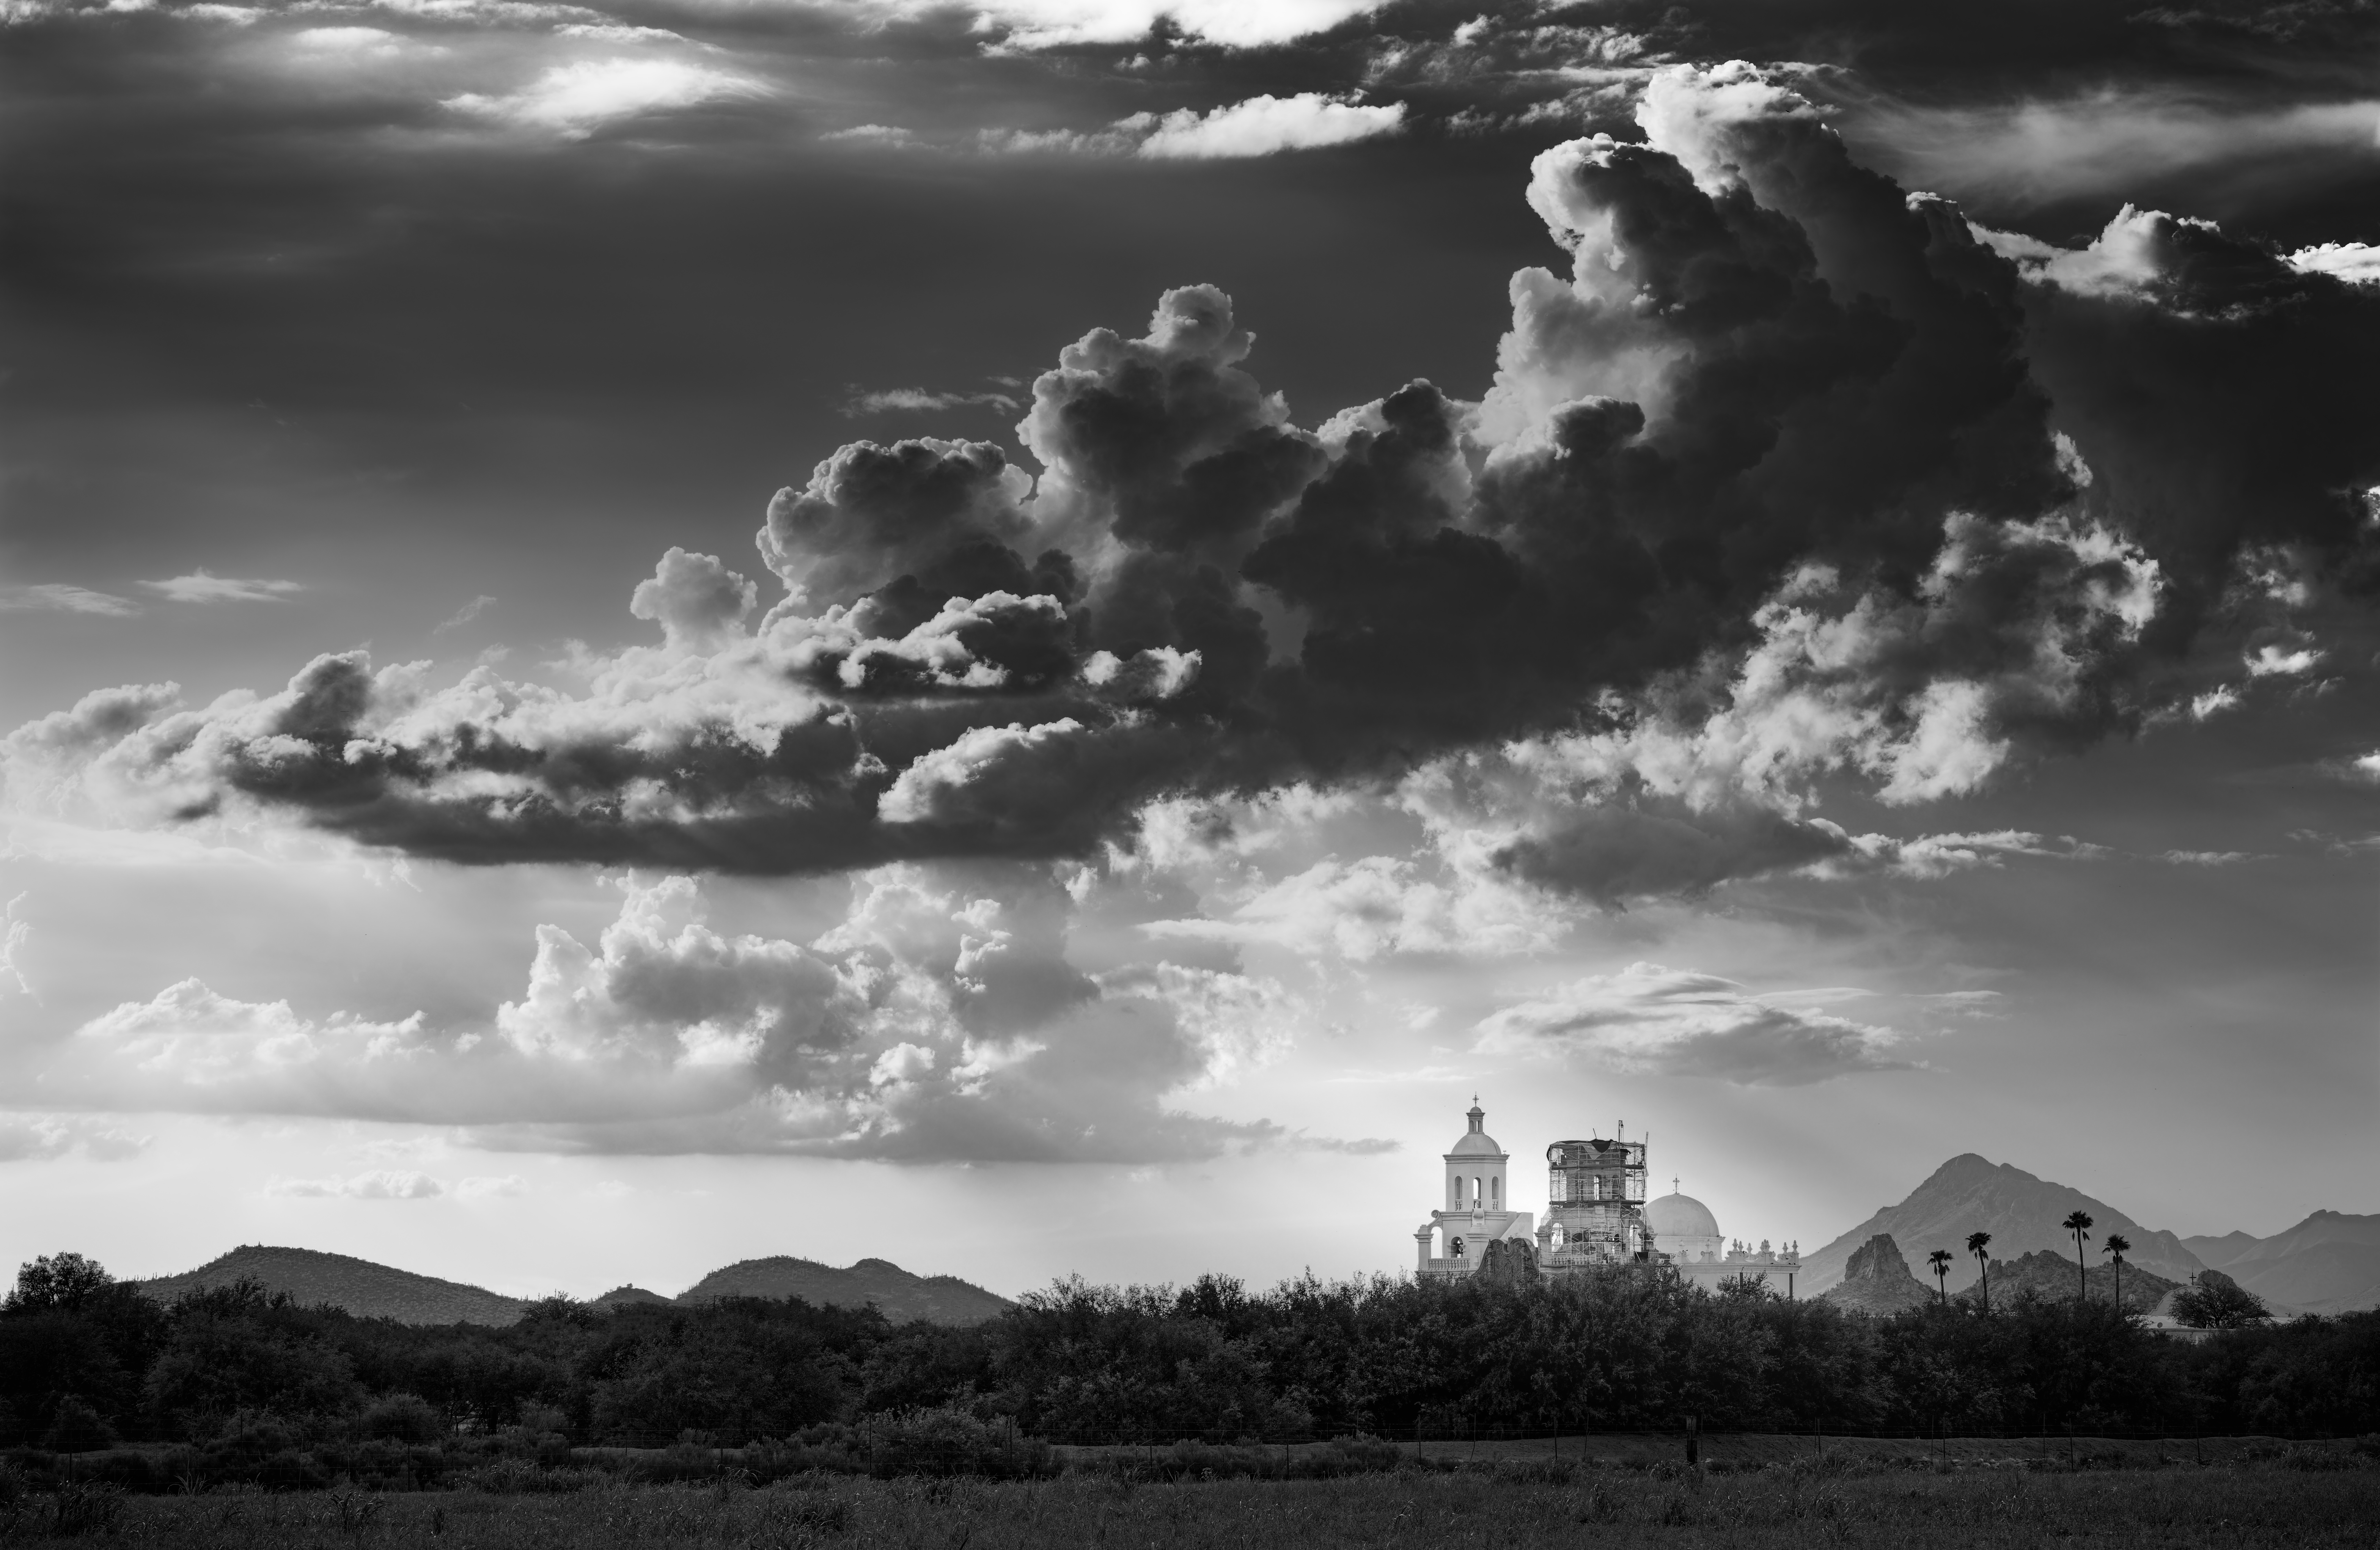 The Mission of San Xavier in black and white under billowing clouds with god-like rays shinning on the white mission. | Photo Title: La Misión de San Xavier del Bac | Photo by Jason Robert O'Kennedy ©2021